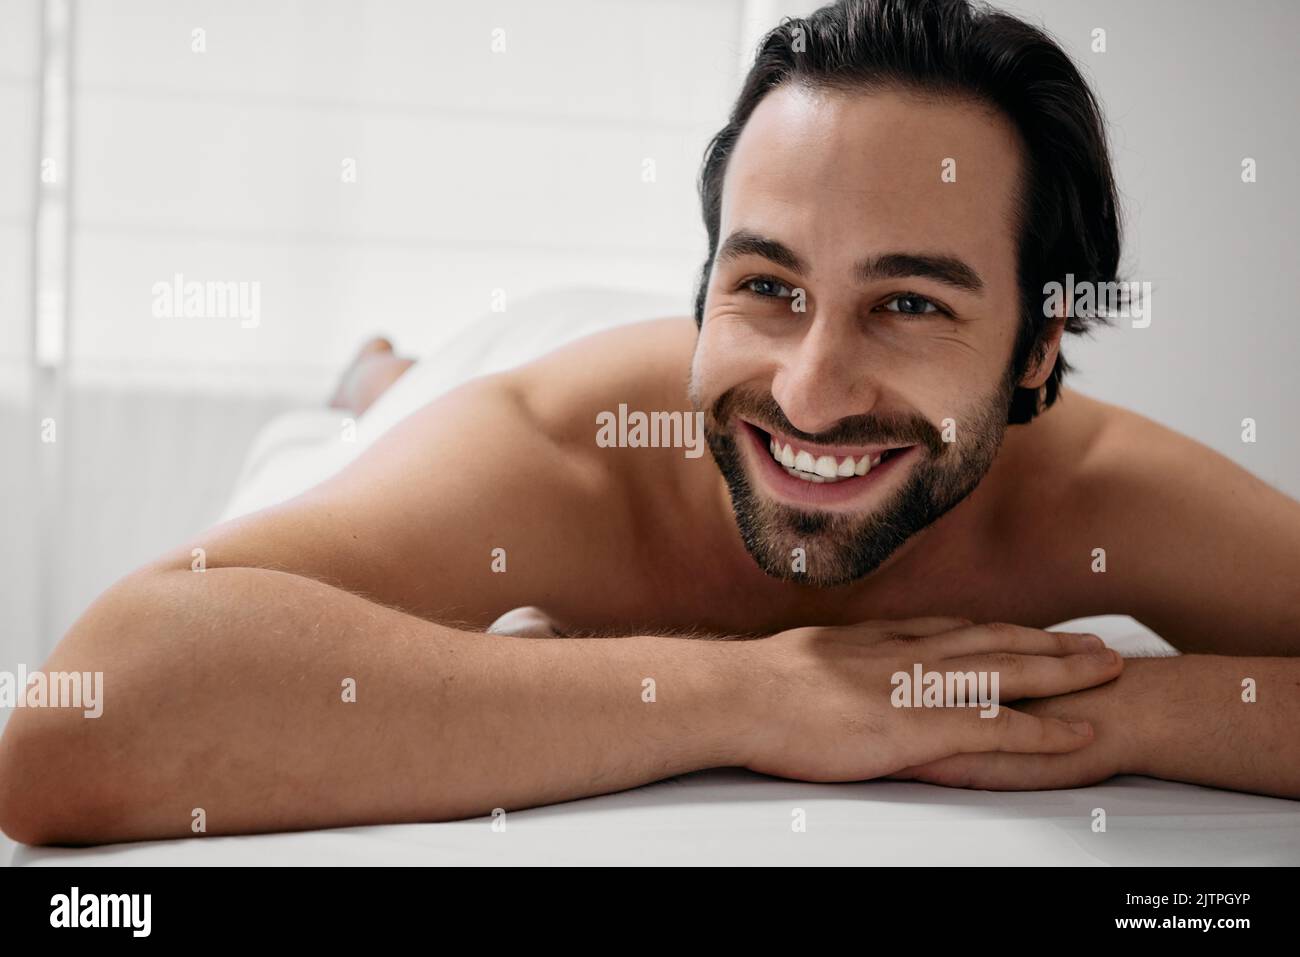 Weekend on wellness spa. Portrait of happy man with toothy smile lying on massage table after relaxes anti-stress massage Stock Photo